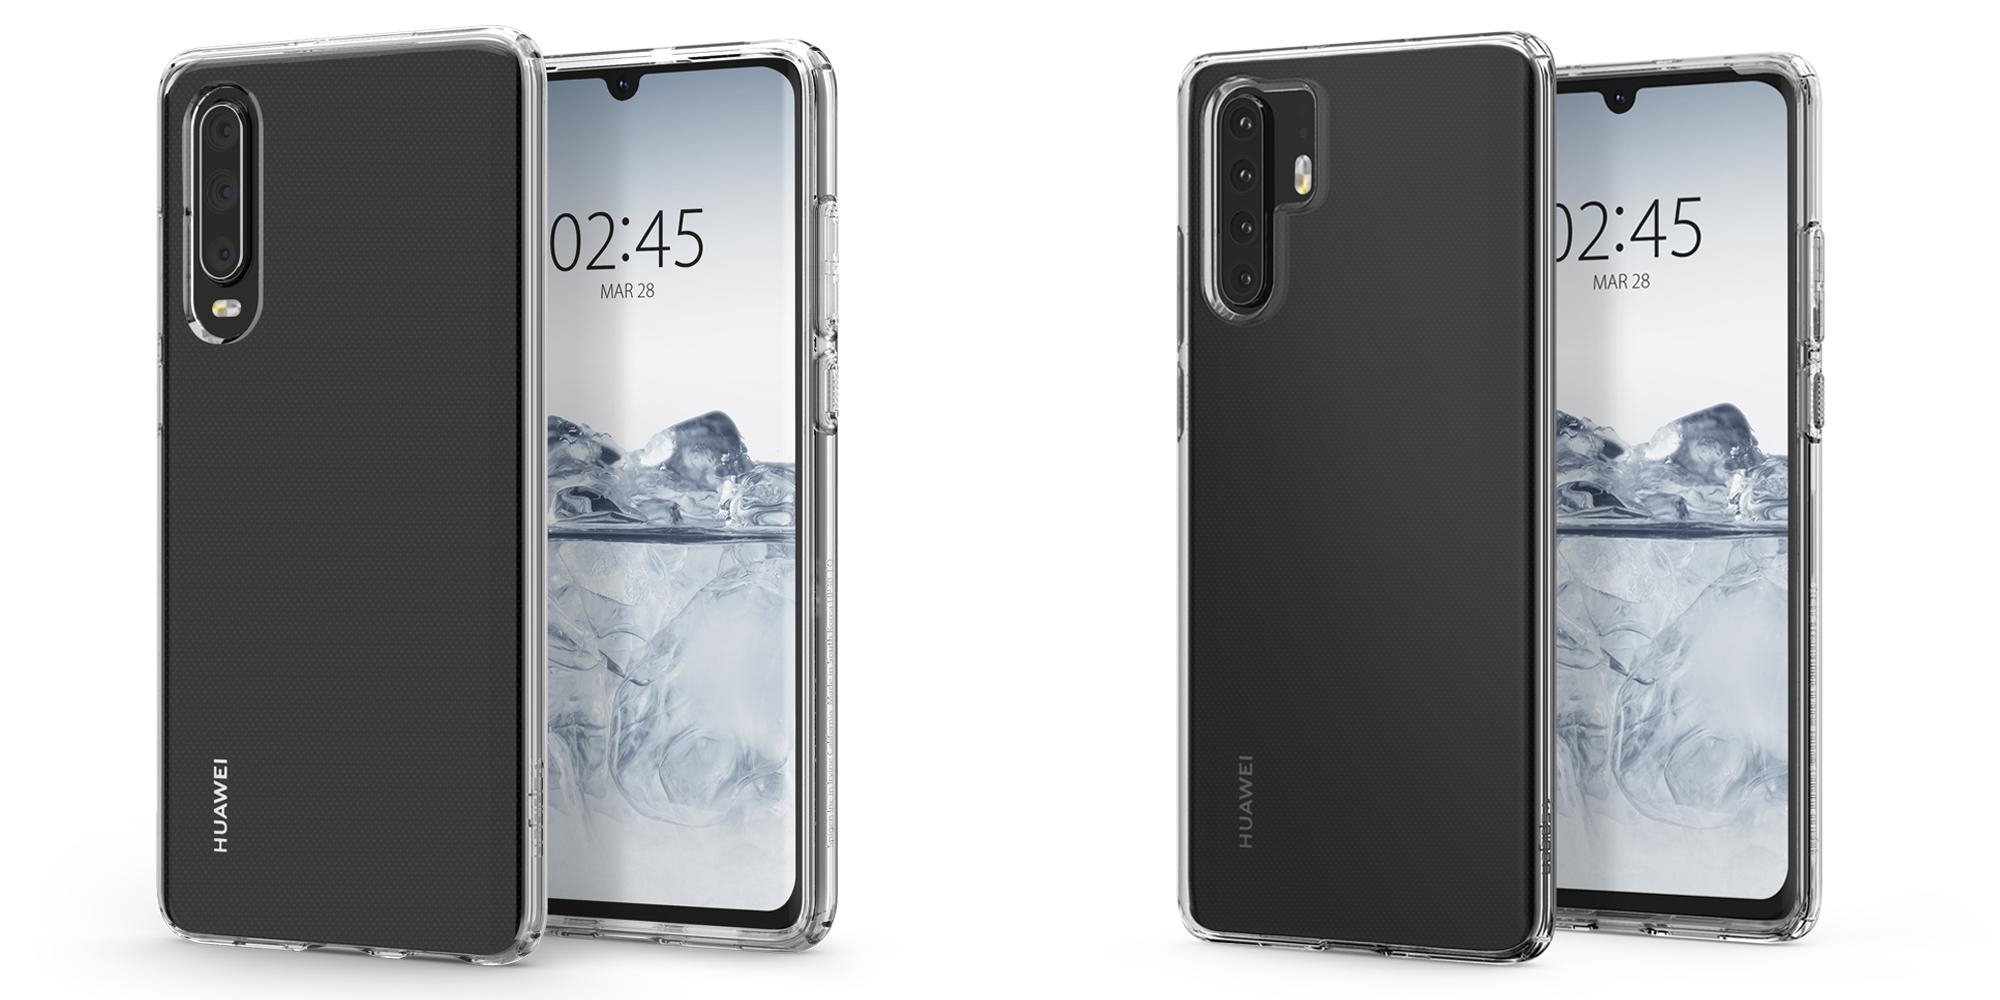 Huawei P30 & P30 Pro All Set to be Released